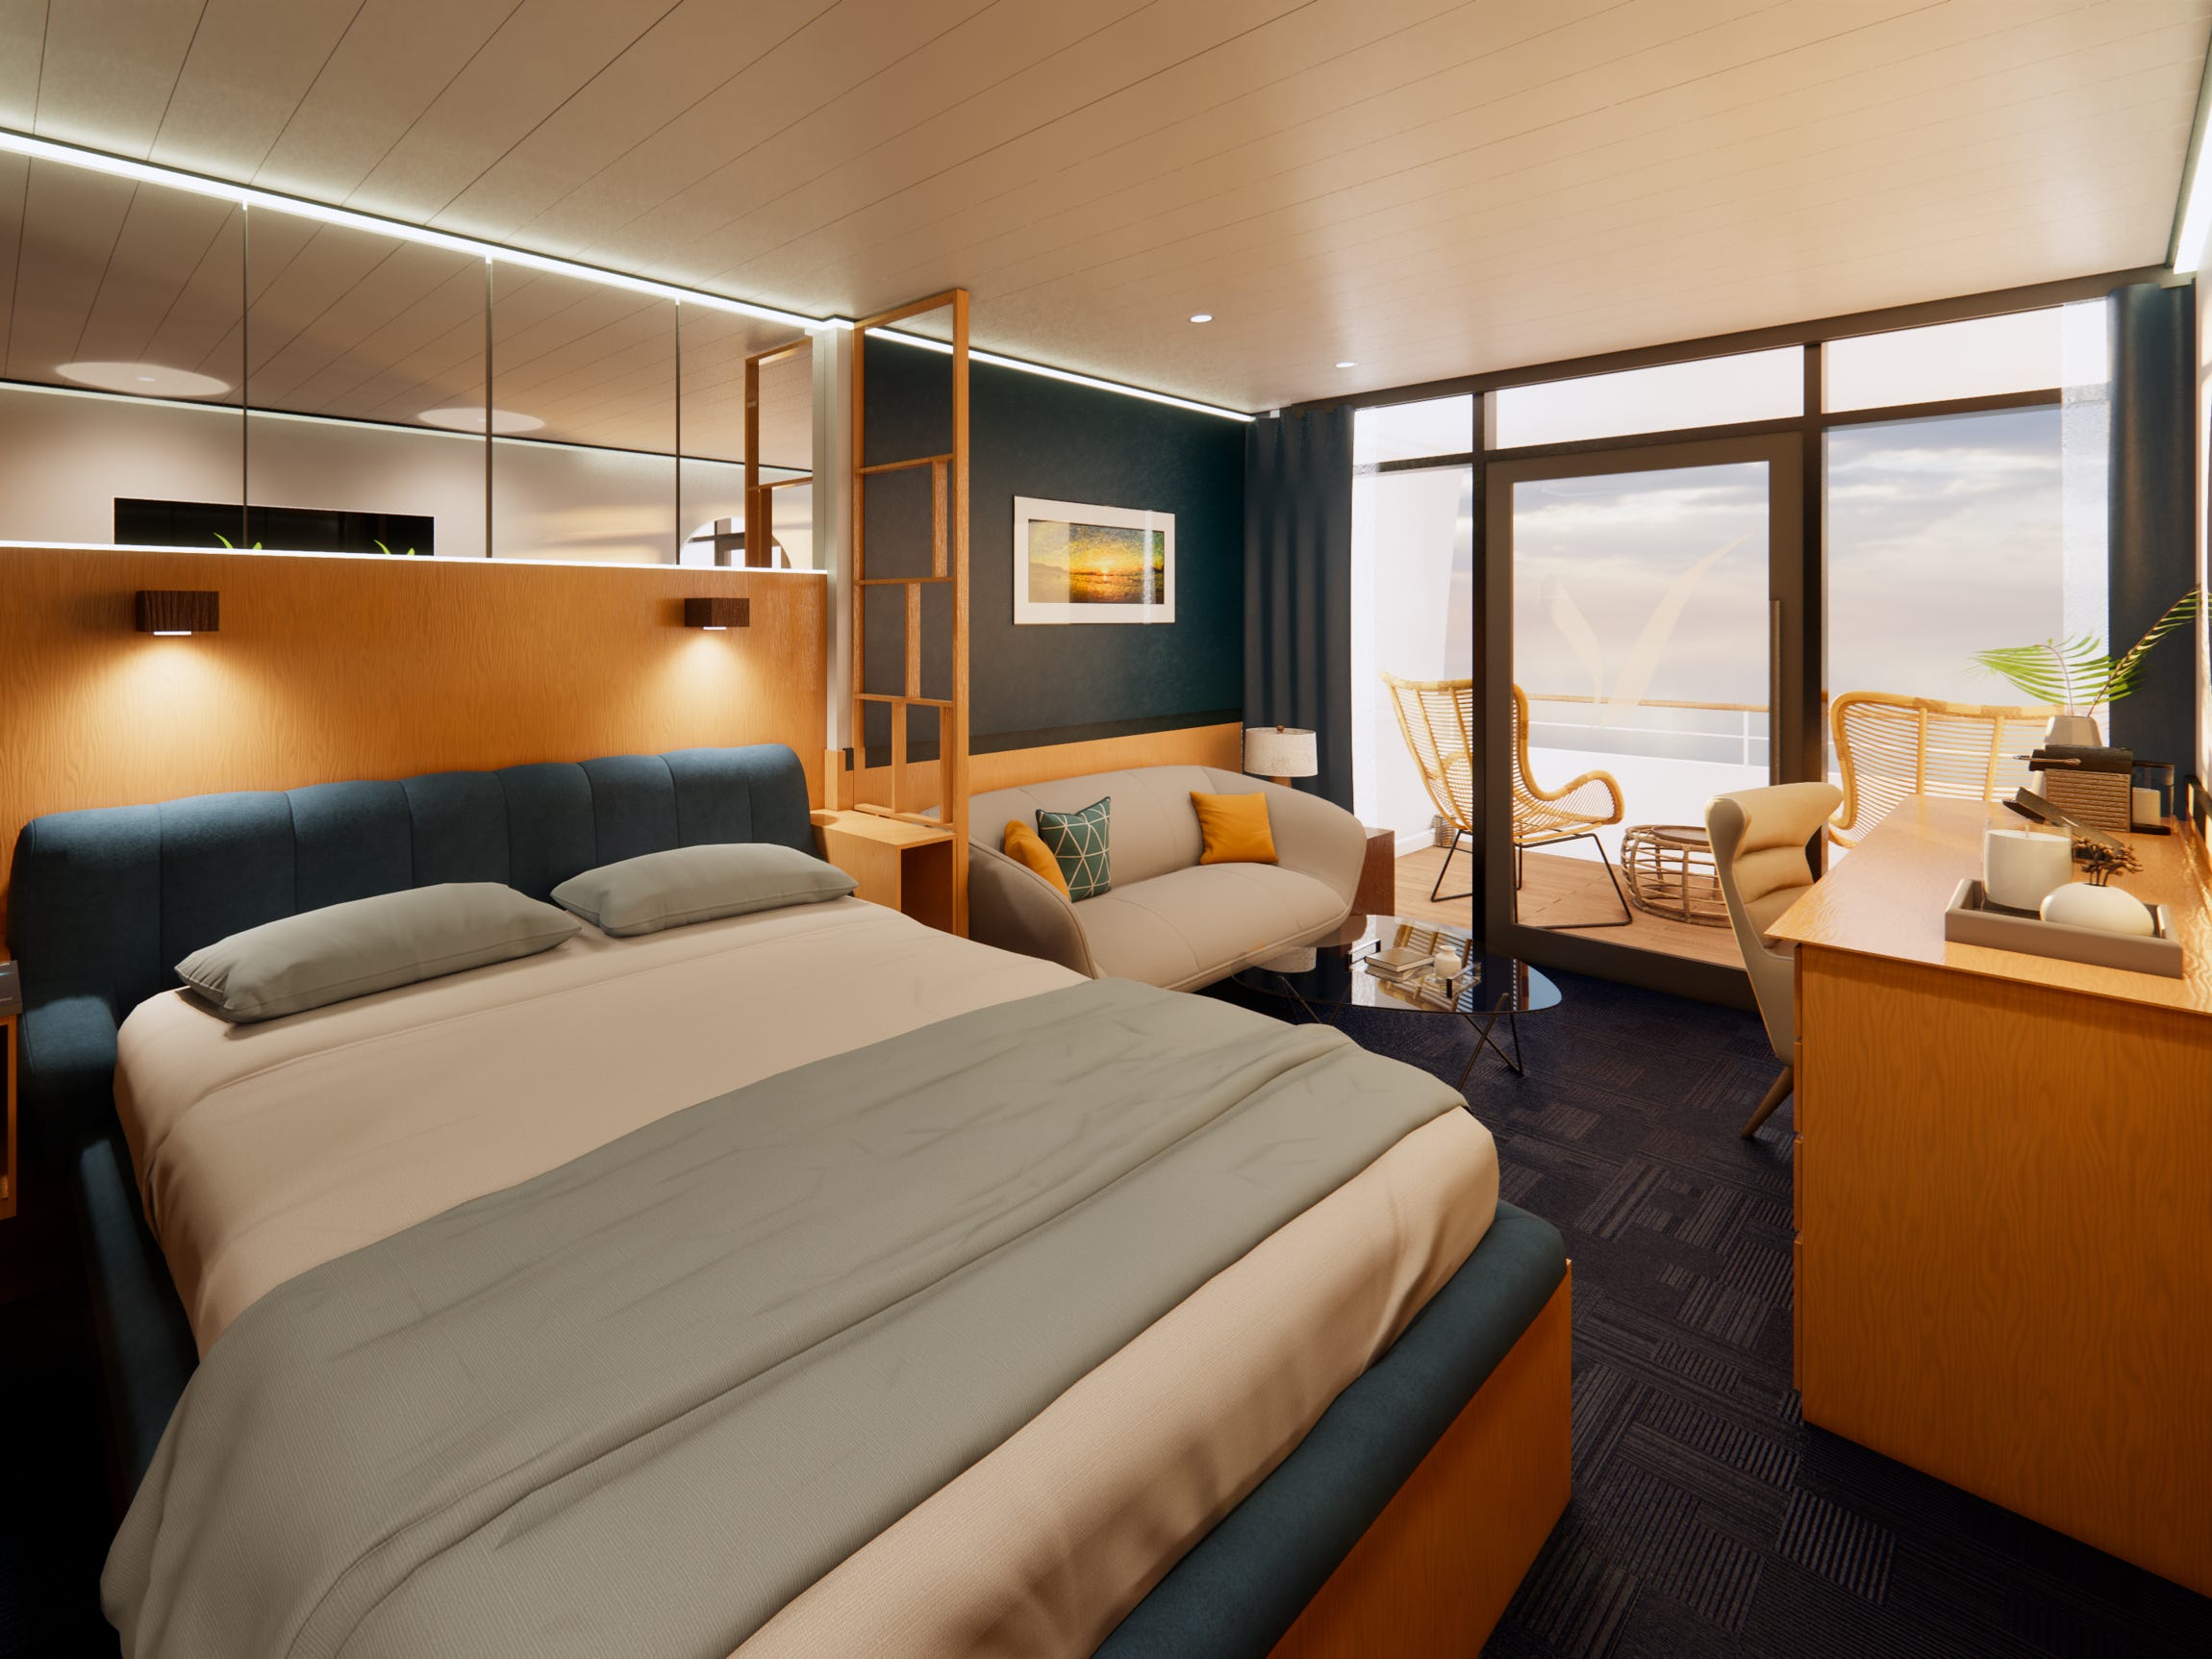 A rendering of a stateroom on Villa Vie's upcoming cruise ship